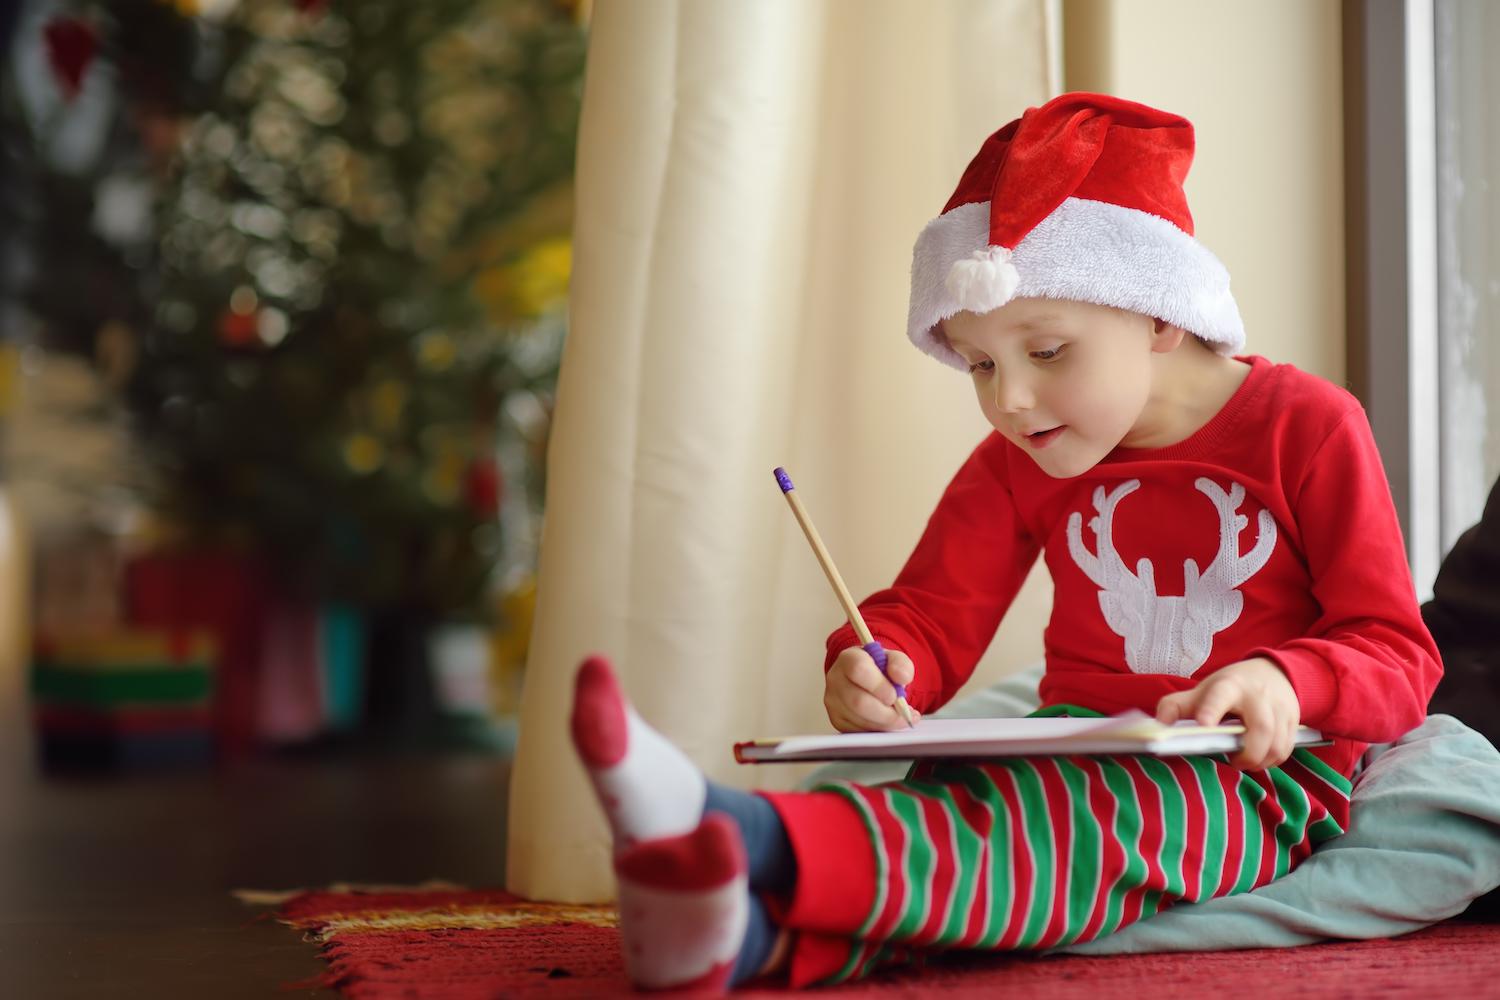 Co-parenting Tips if This Is Your First Christmas Since Separating